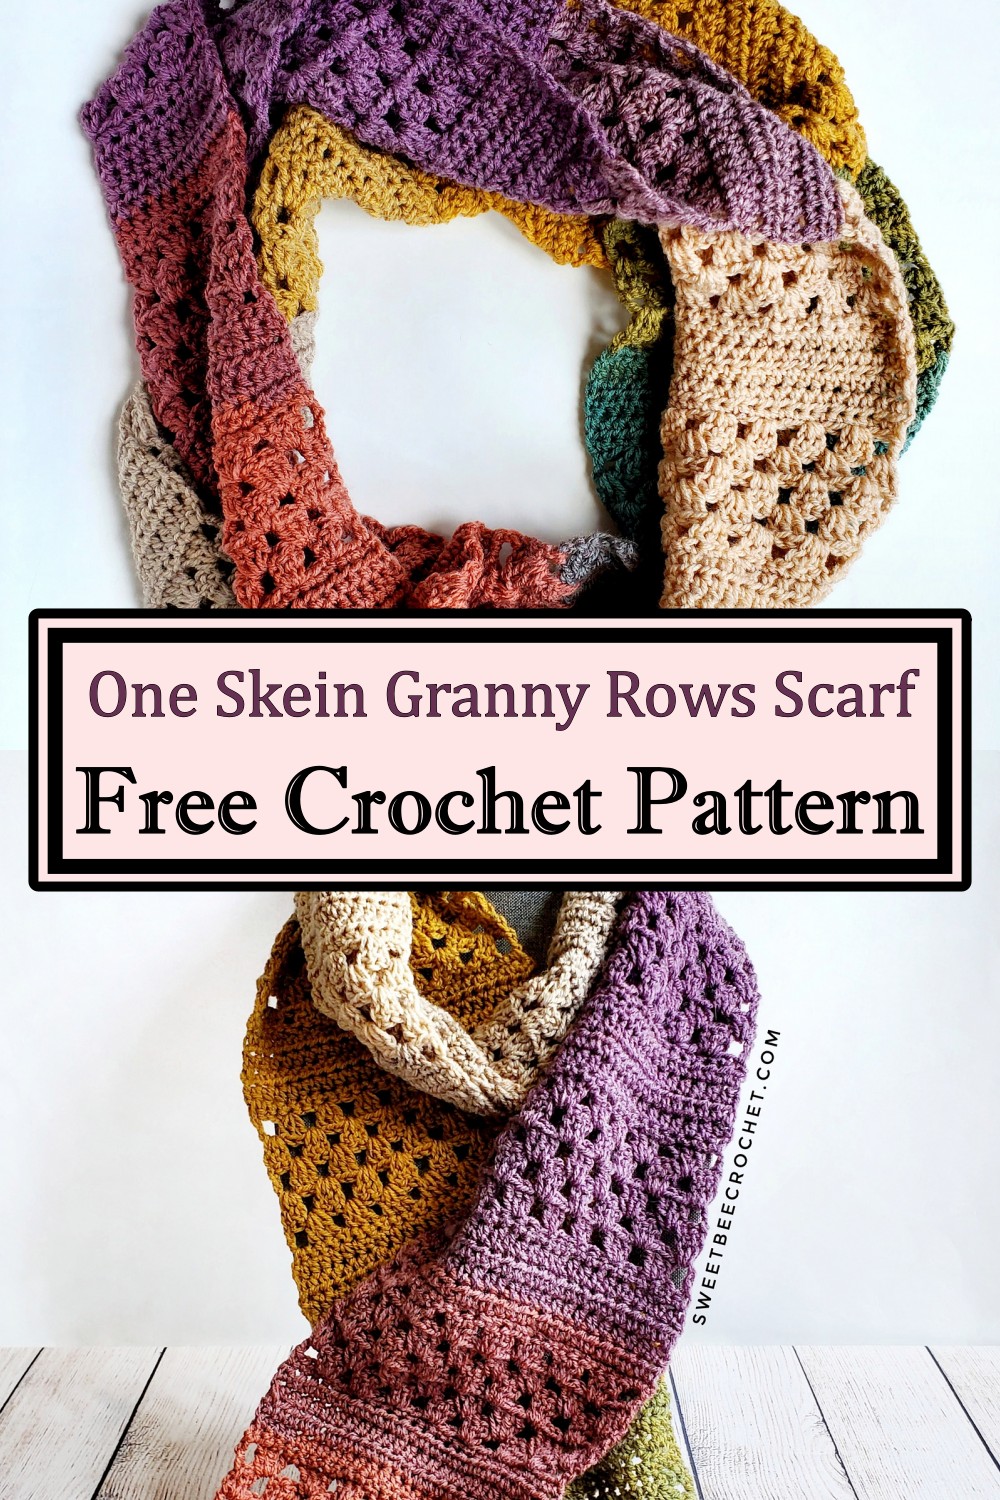 One Skein Granny Rows Scarf